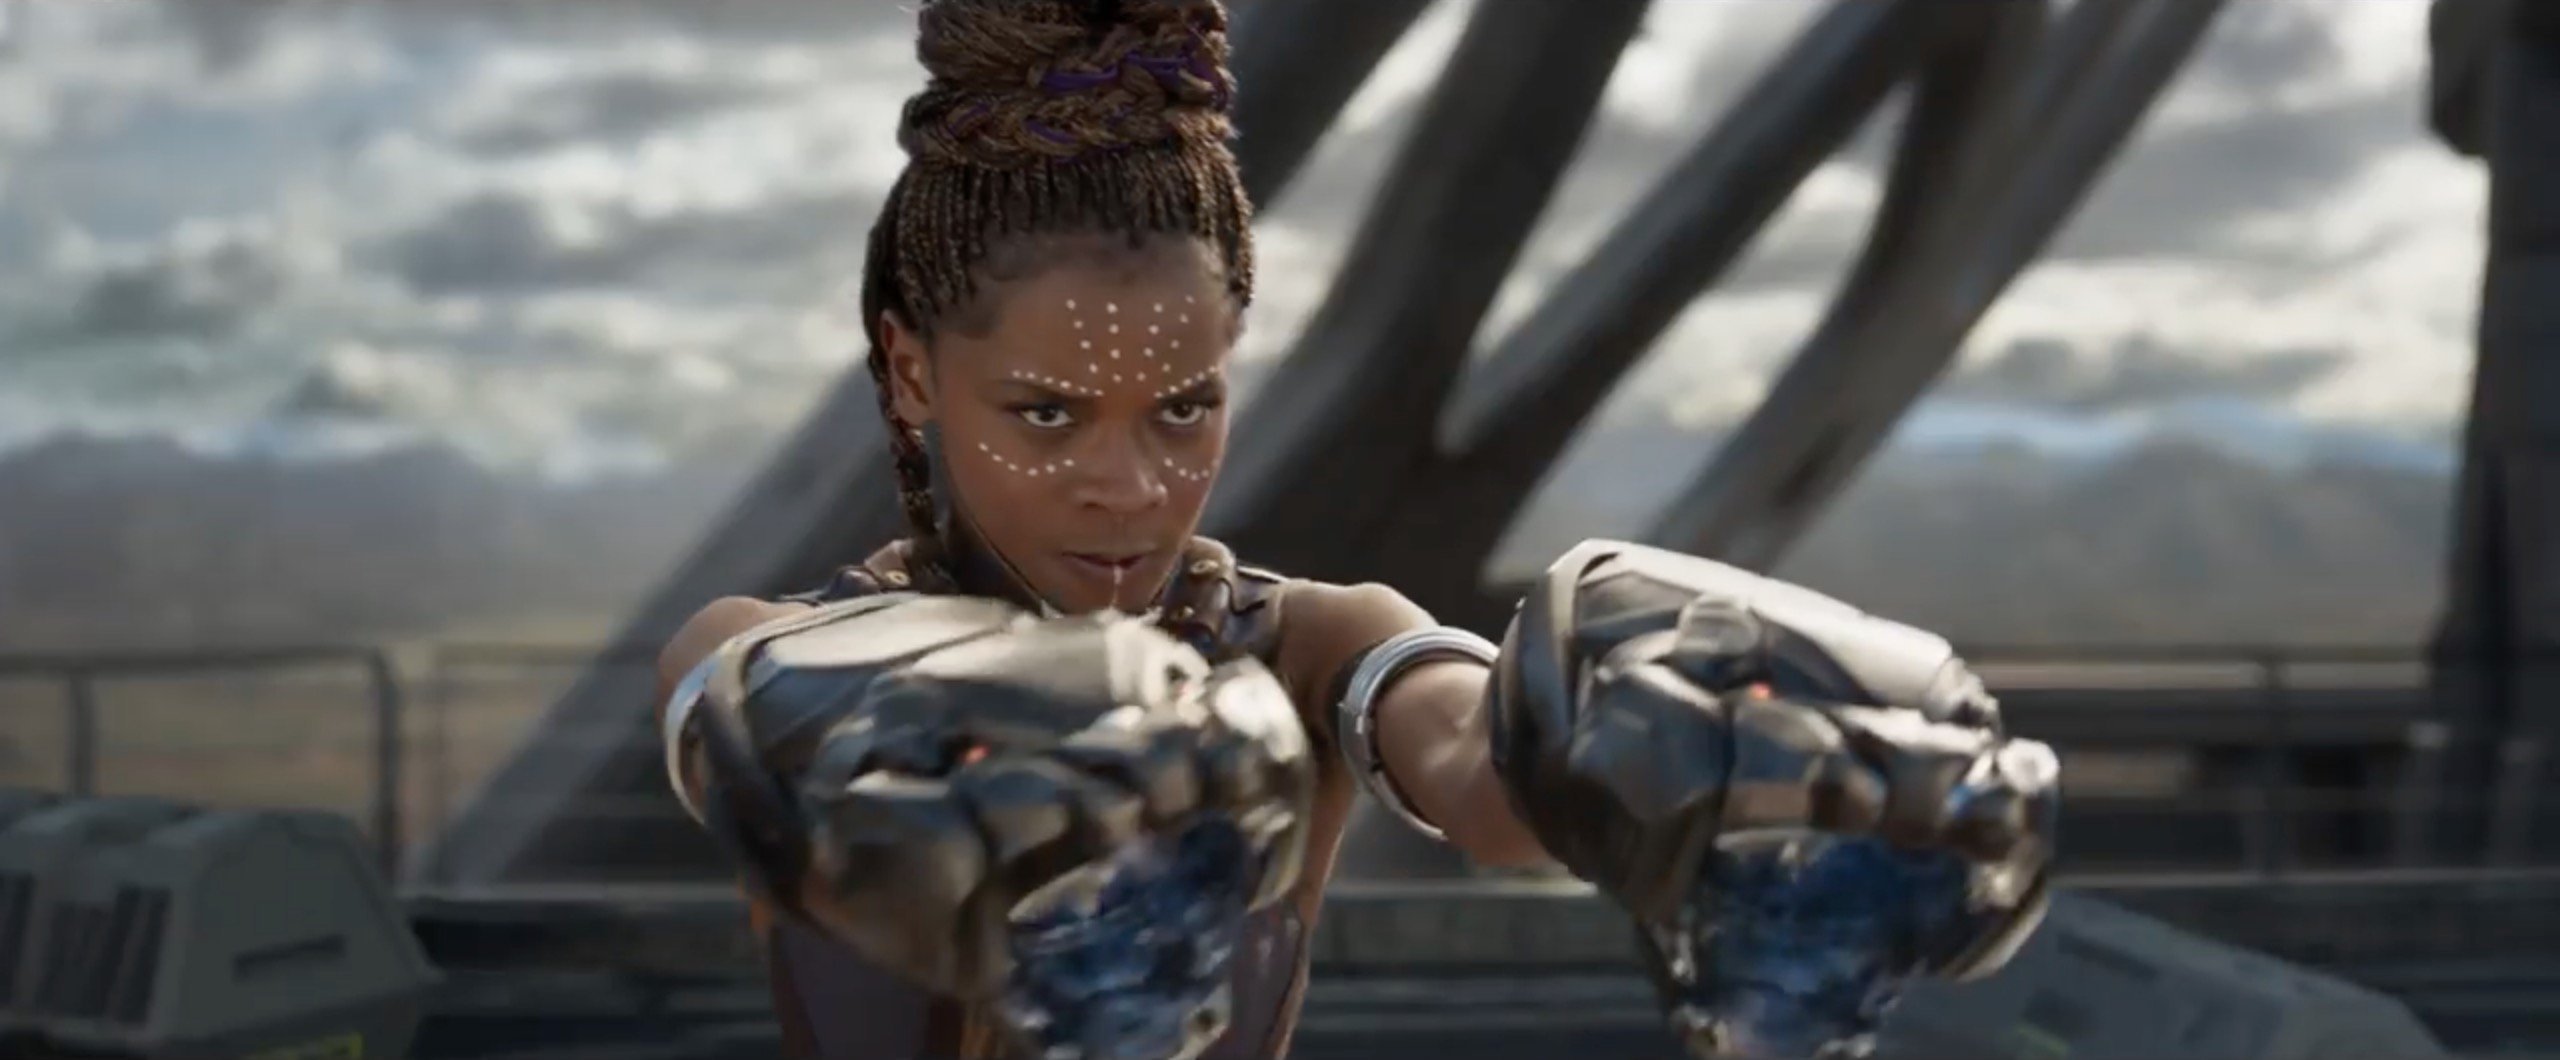  Scene from Black Panther of Shuri played by actress Letitia Wright courtesy Marvel Studios